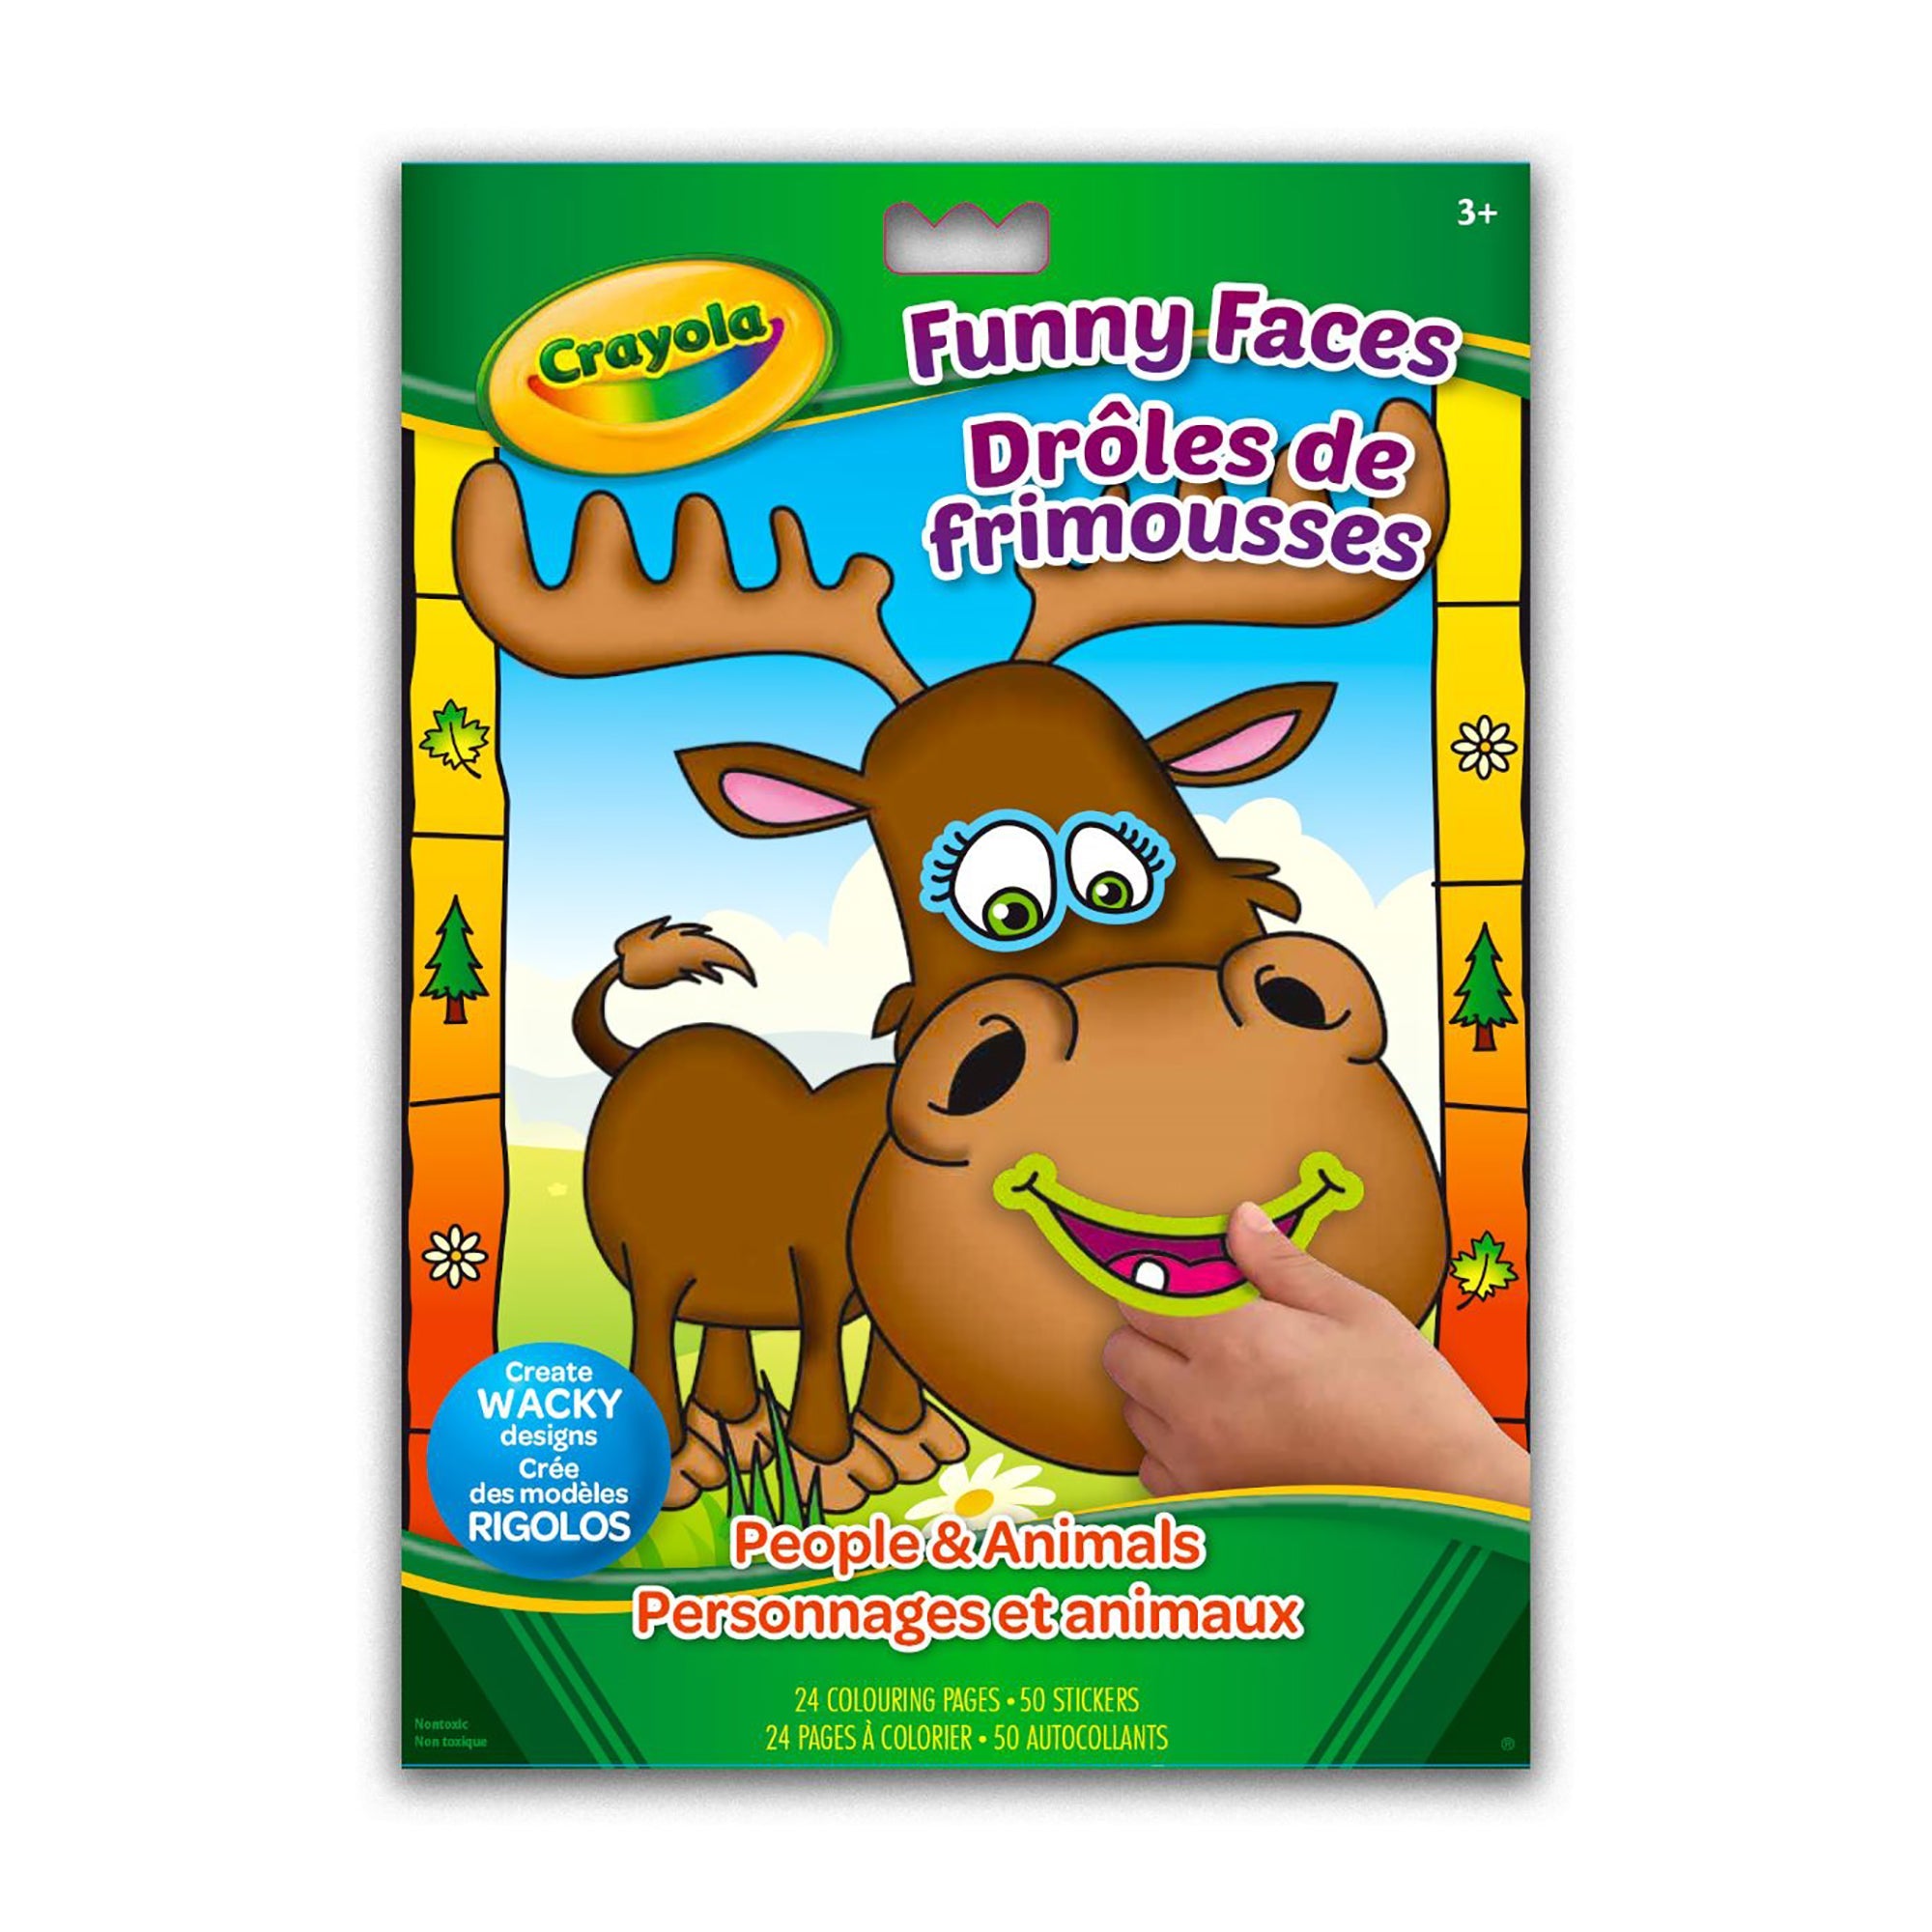 Crayola Funny Faces Coloring and Stickers Book - 24 Pages and 51 Stickers 8x11.5in